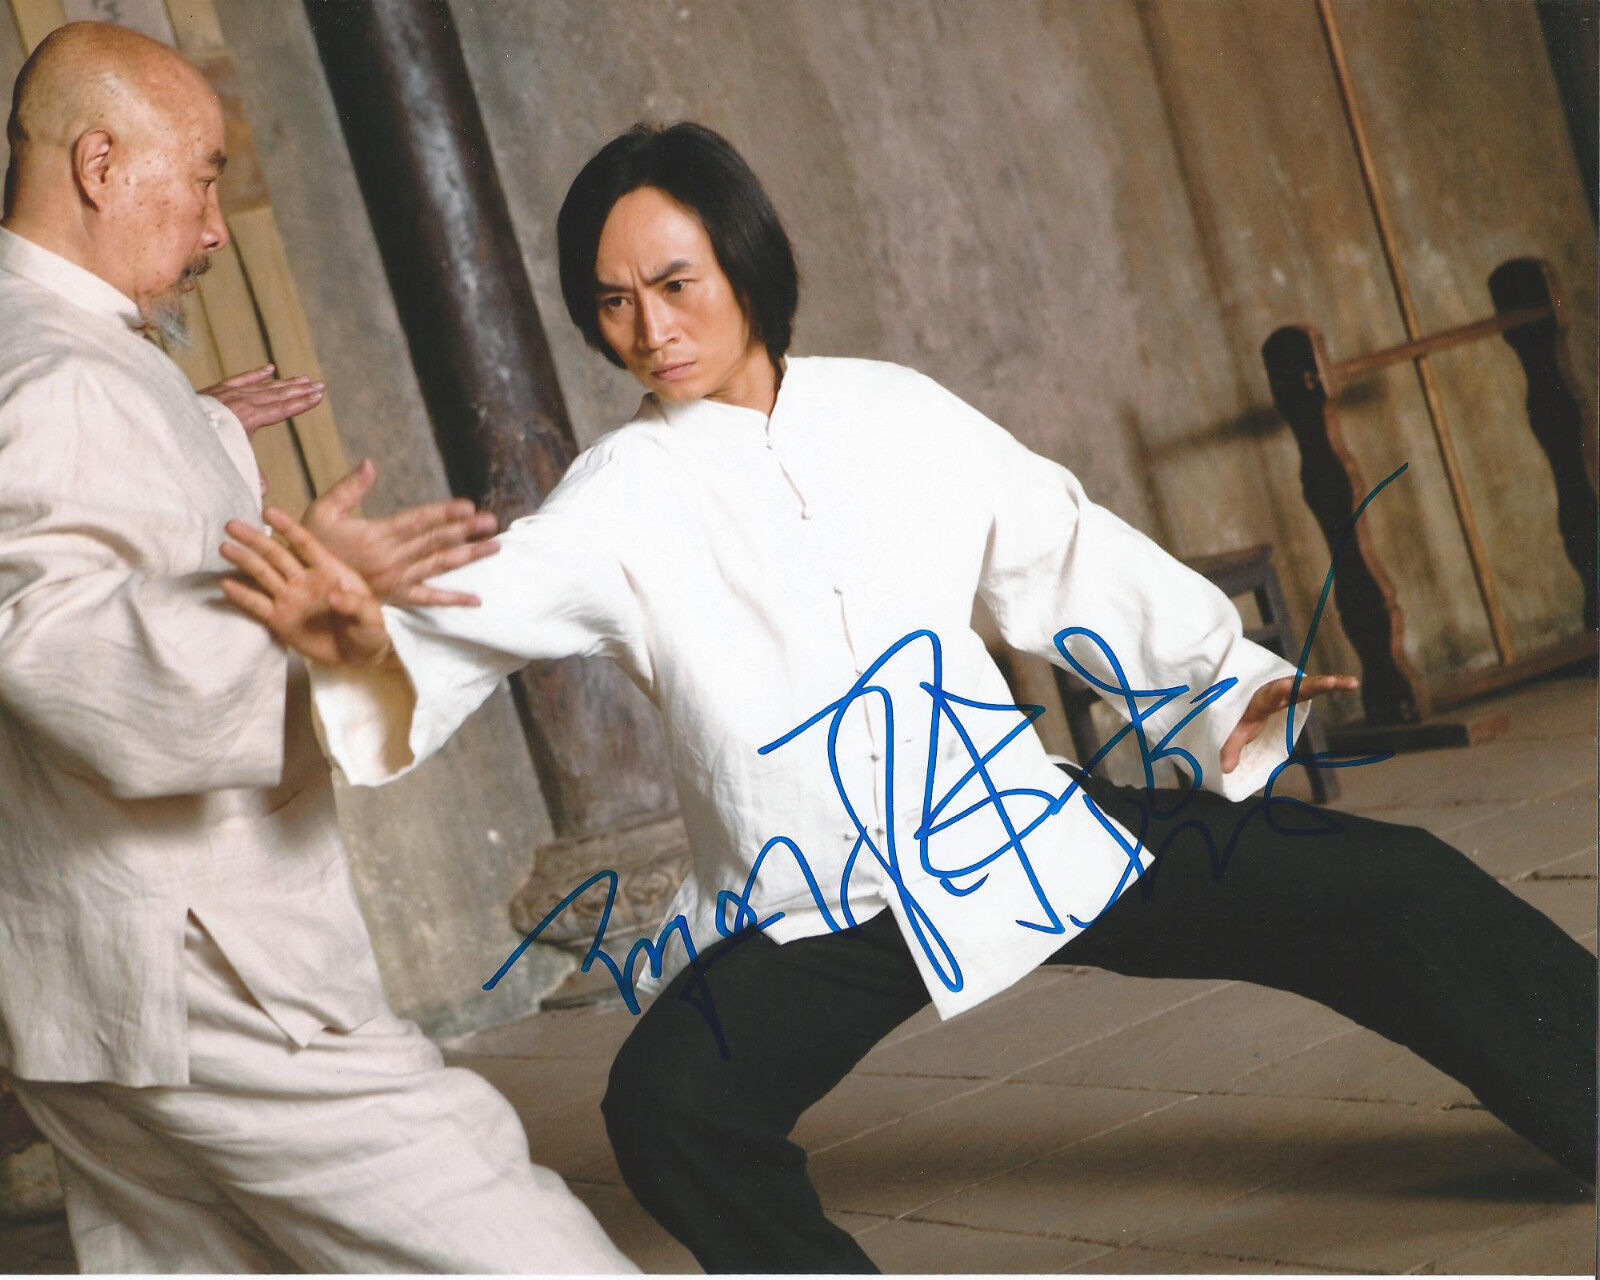 ACTOR TIGER HU CHEN SIGNED MAN OF TAI CHI 8X10 Photo Poster painting W/COA THE MATRIX RELOADED